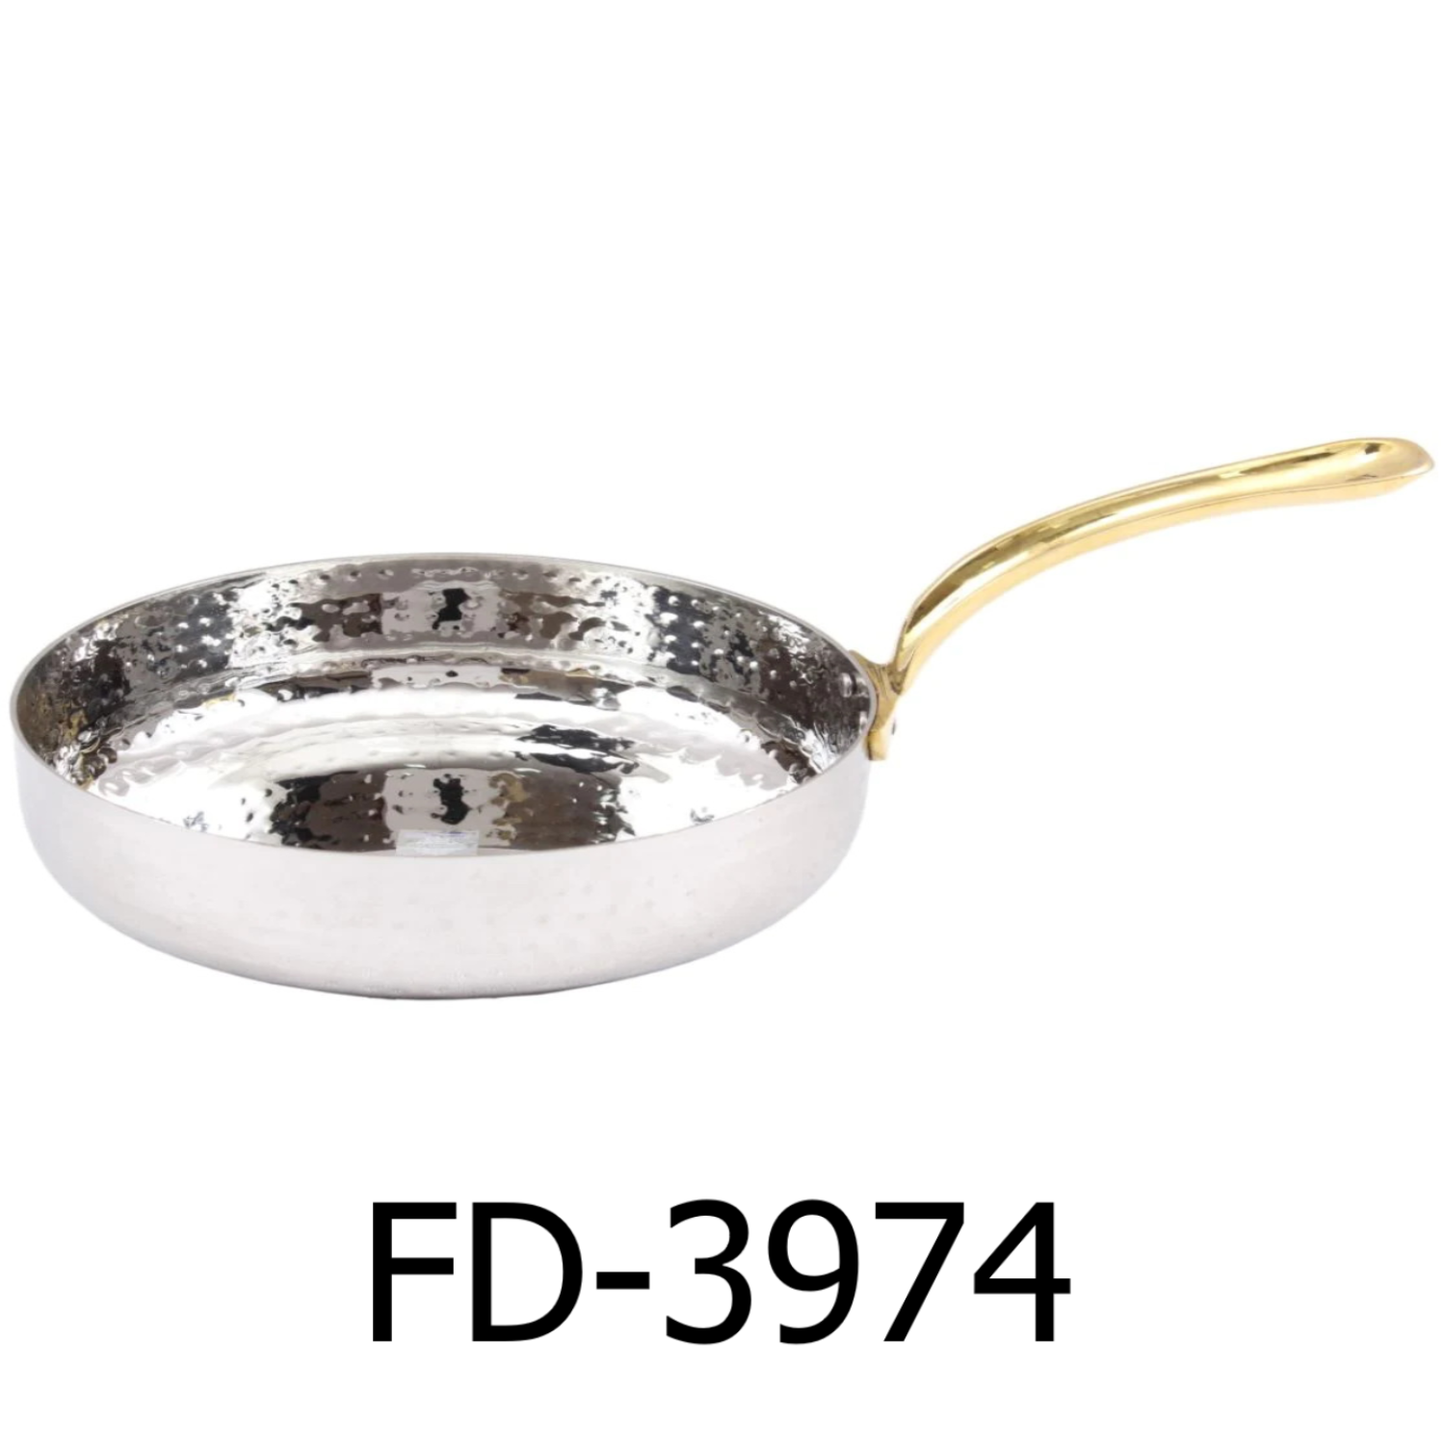 7.25" Stainless Steel Hammered Mini Fry Pan with Brass Handle